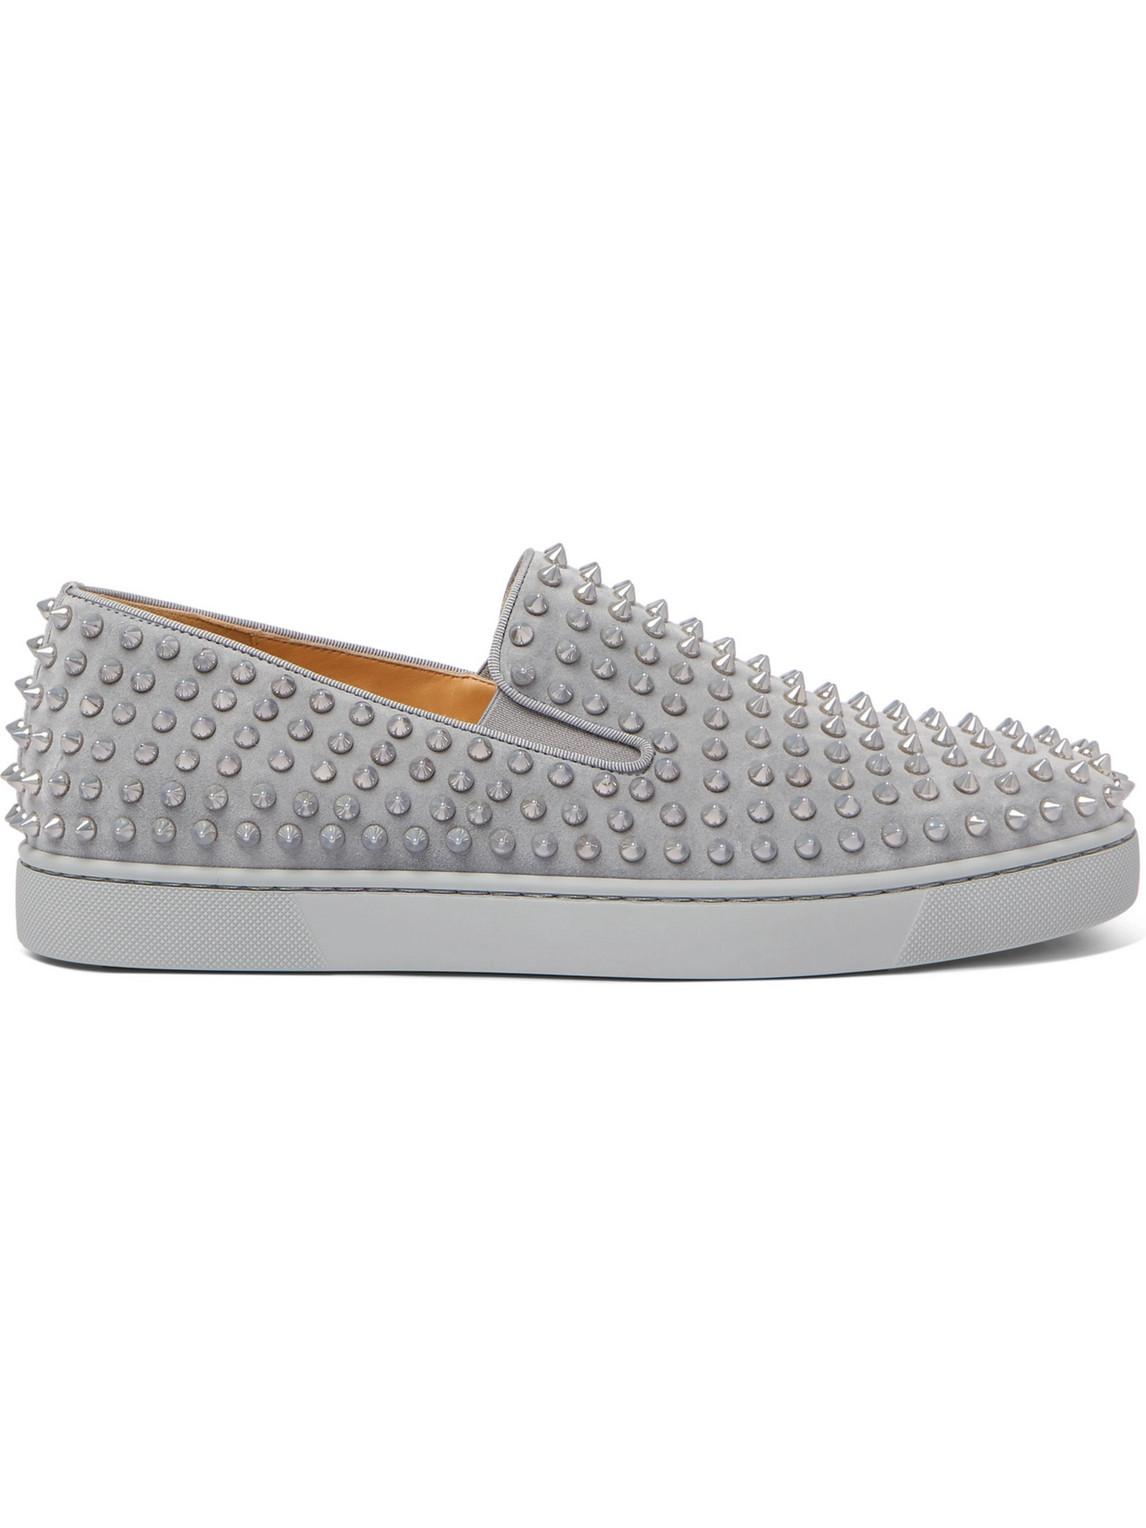 Christian Louboutin Roller-boat Spiked Suede Slip-on Sneakers In Gray